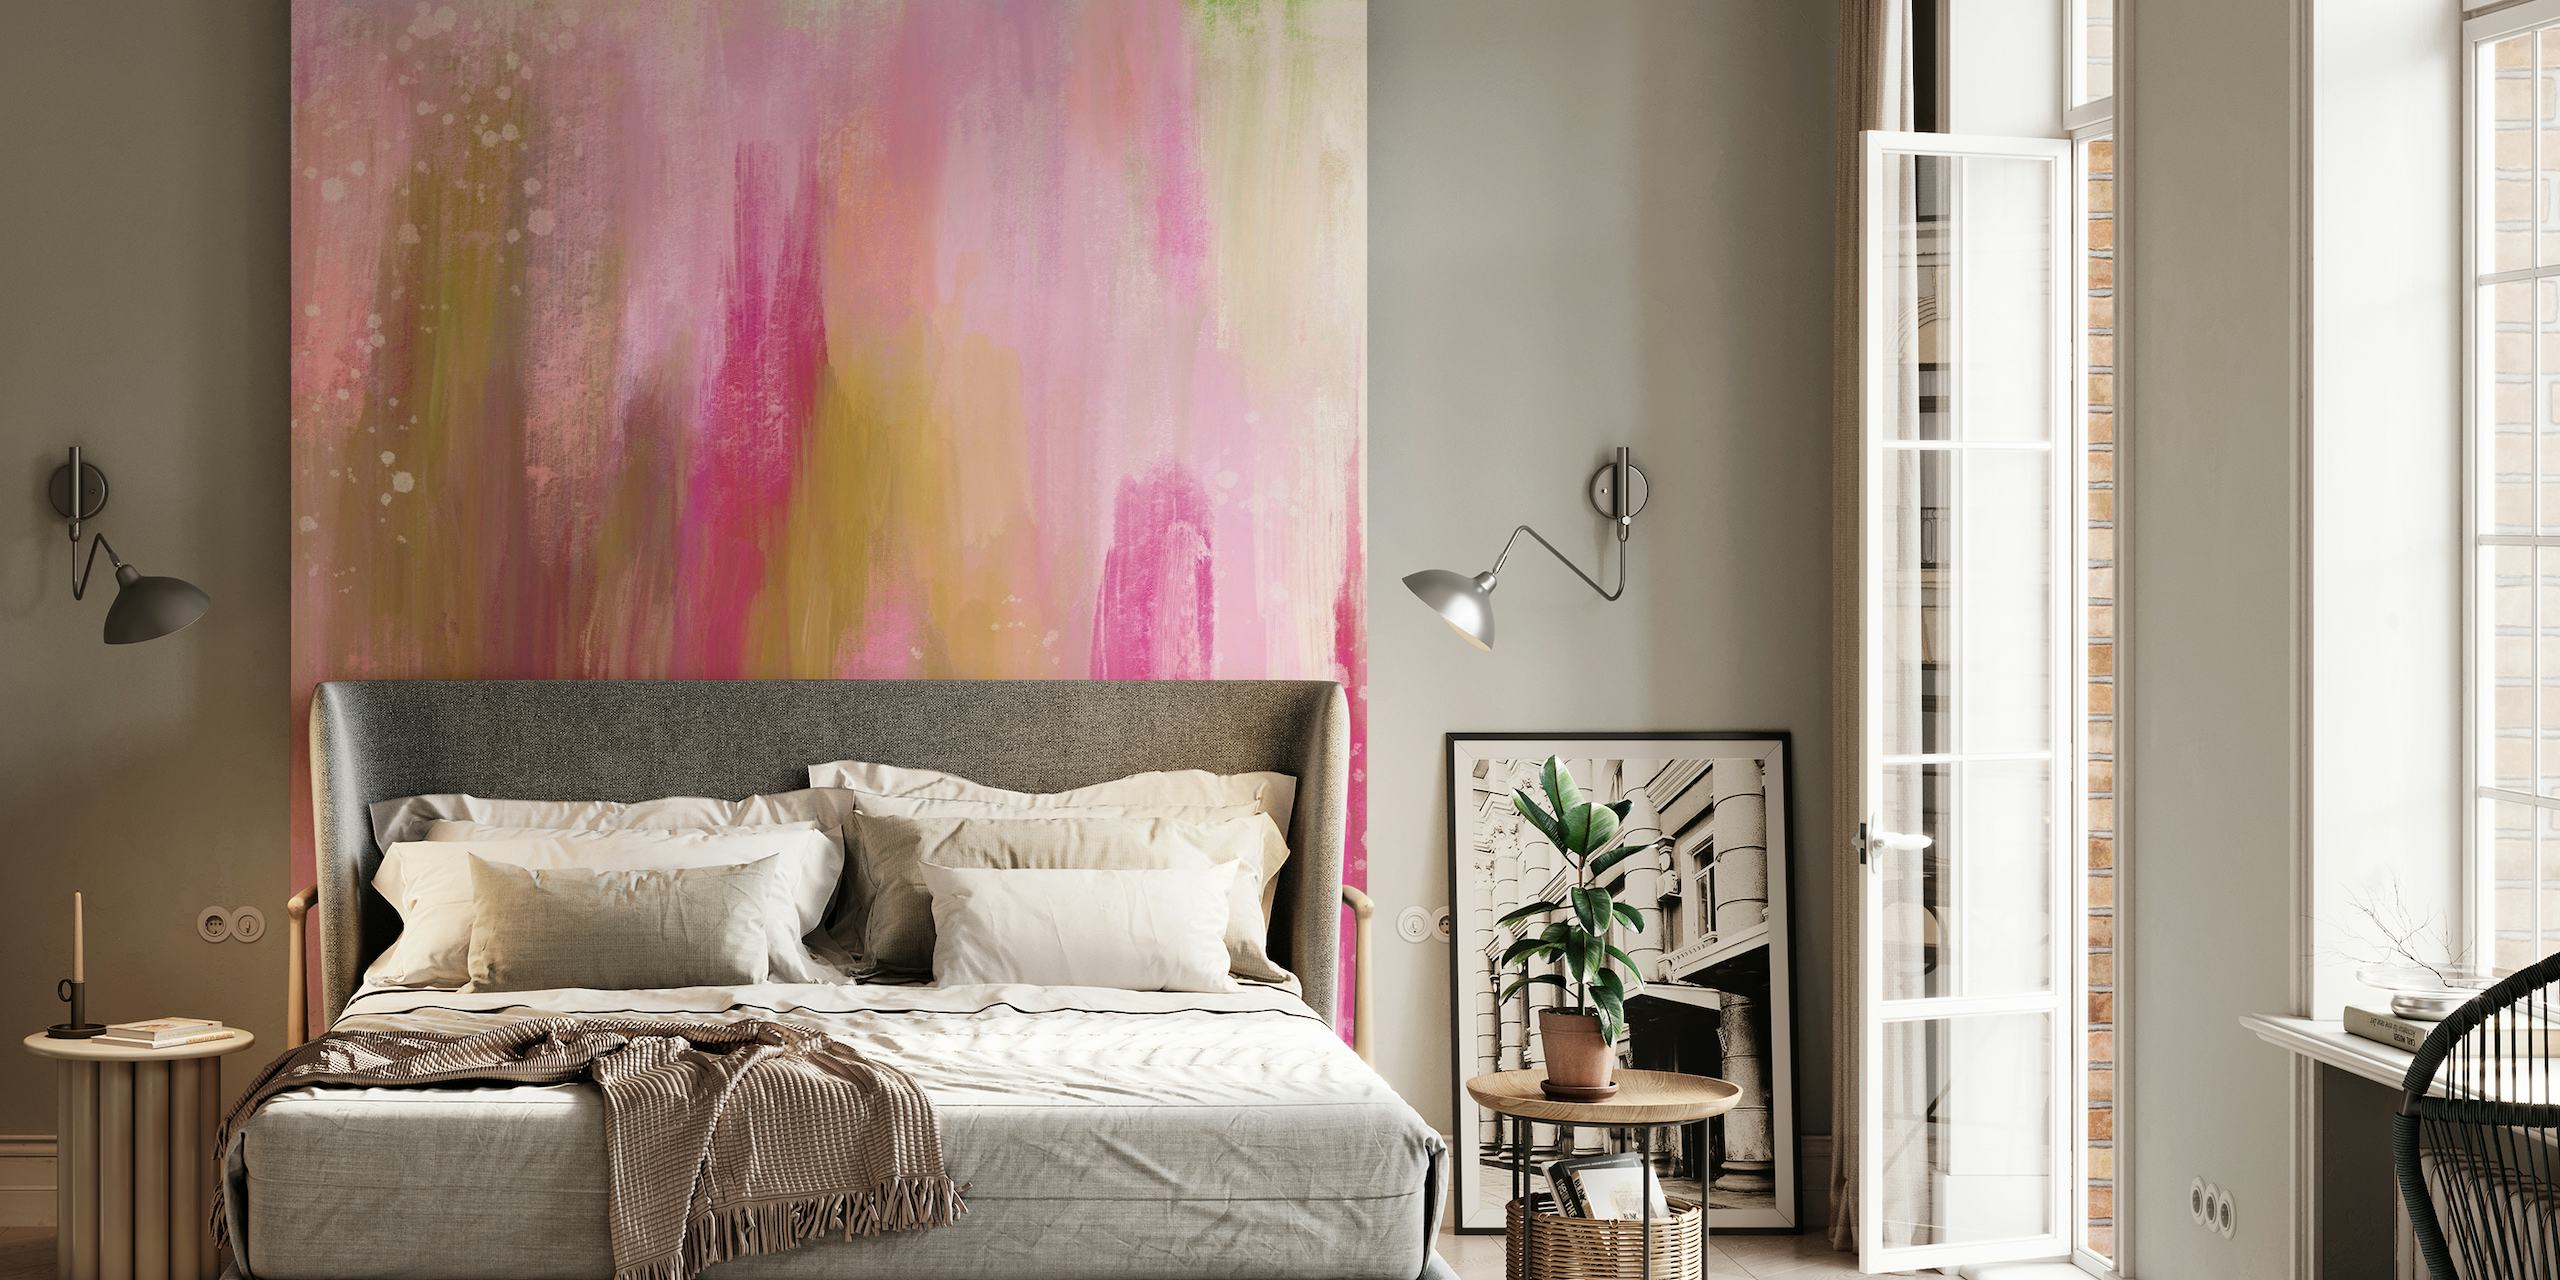 Soft pink and white abstract watercolor strokes on a wall mural